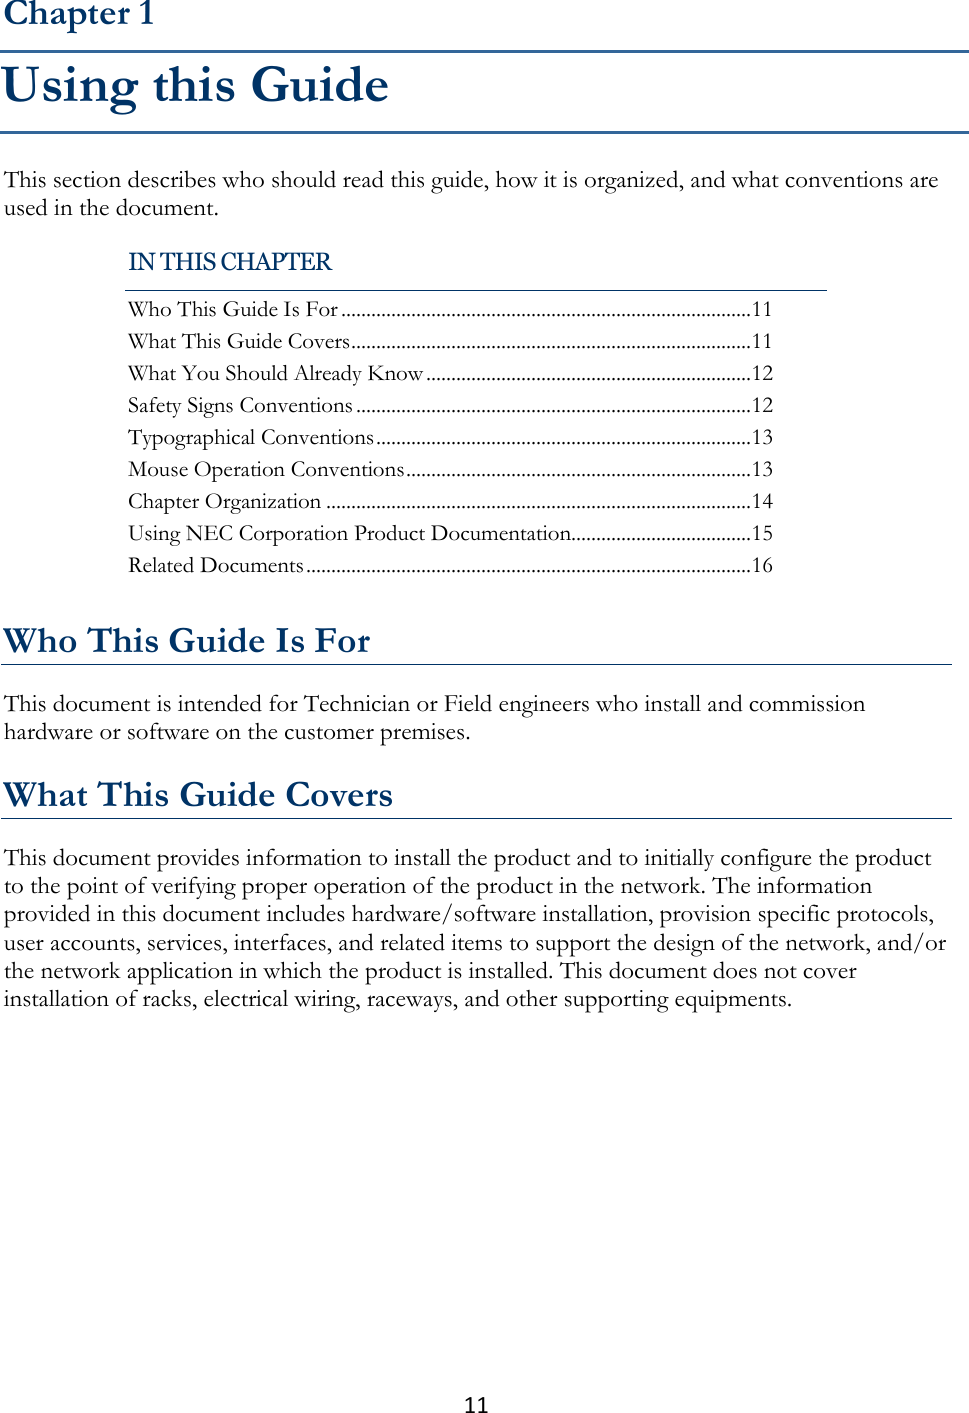 11  This section describes who should read this guide, how it is organized, and what conventions are used in the document.   Who This Guide Is For This document is intended for Technician or Field engineers who install and commission hardware or software on the customer premises.  What This Guide Covers This document provides information to install the product and to initially configure the product to the point of verifying proper operation of the product in the network. The information provided in this document includes hardware/software installation, provision specific protocols, user accounts, services, interfaces, and related items to support the design of the network, and/or the network application in which the product is installed. This document does not cover installation of racks, electrical wiring, raceways, and other supporting equipments.  Chapter 1 Using this Guide IN THIS CHAPTER Who This Guide Is For .................................................................................. 11 What This Guide Covers ................................................................................ 11 What You Should Already Know ................................................................. 12 Safety Signs Conventions ............................................................................... 12 Typographical Conventions ........................................................................... 13 Mouse Operation Conventions ..................................................................... 13 Chapter Organization ..................................................................................... 14 Using NEC Corporation Product Documentation.................................... 15 Related Documents ......................................................................................... 16 